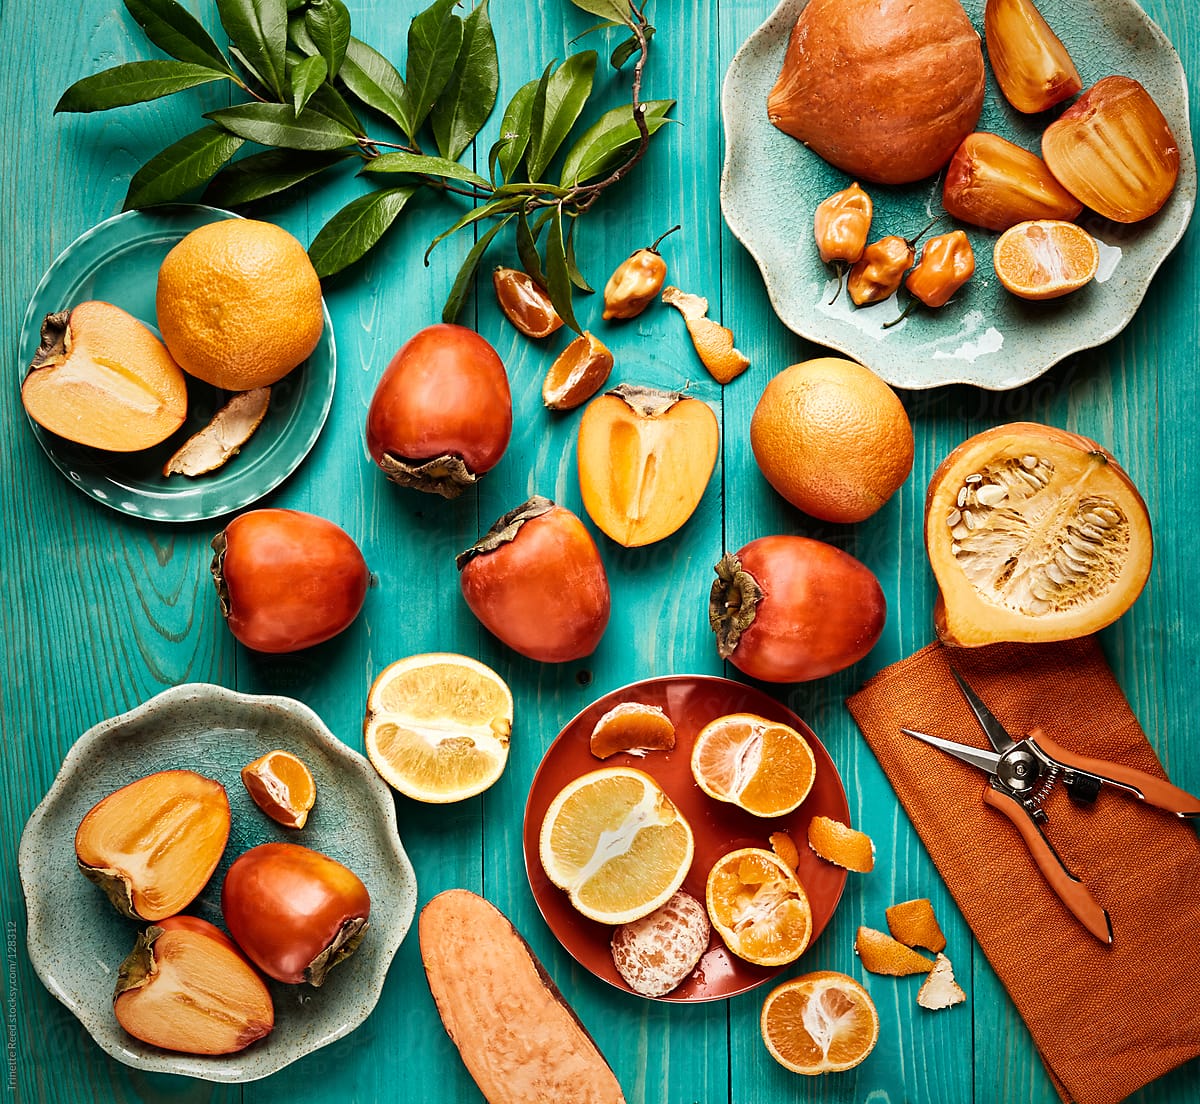 Still life of various orange colored fruits and vegetables